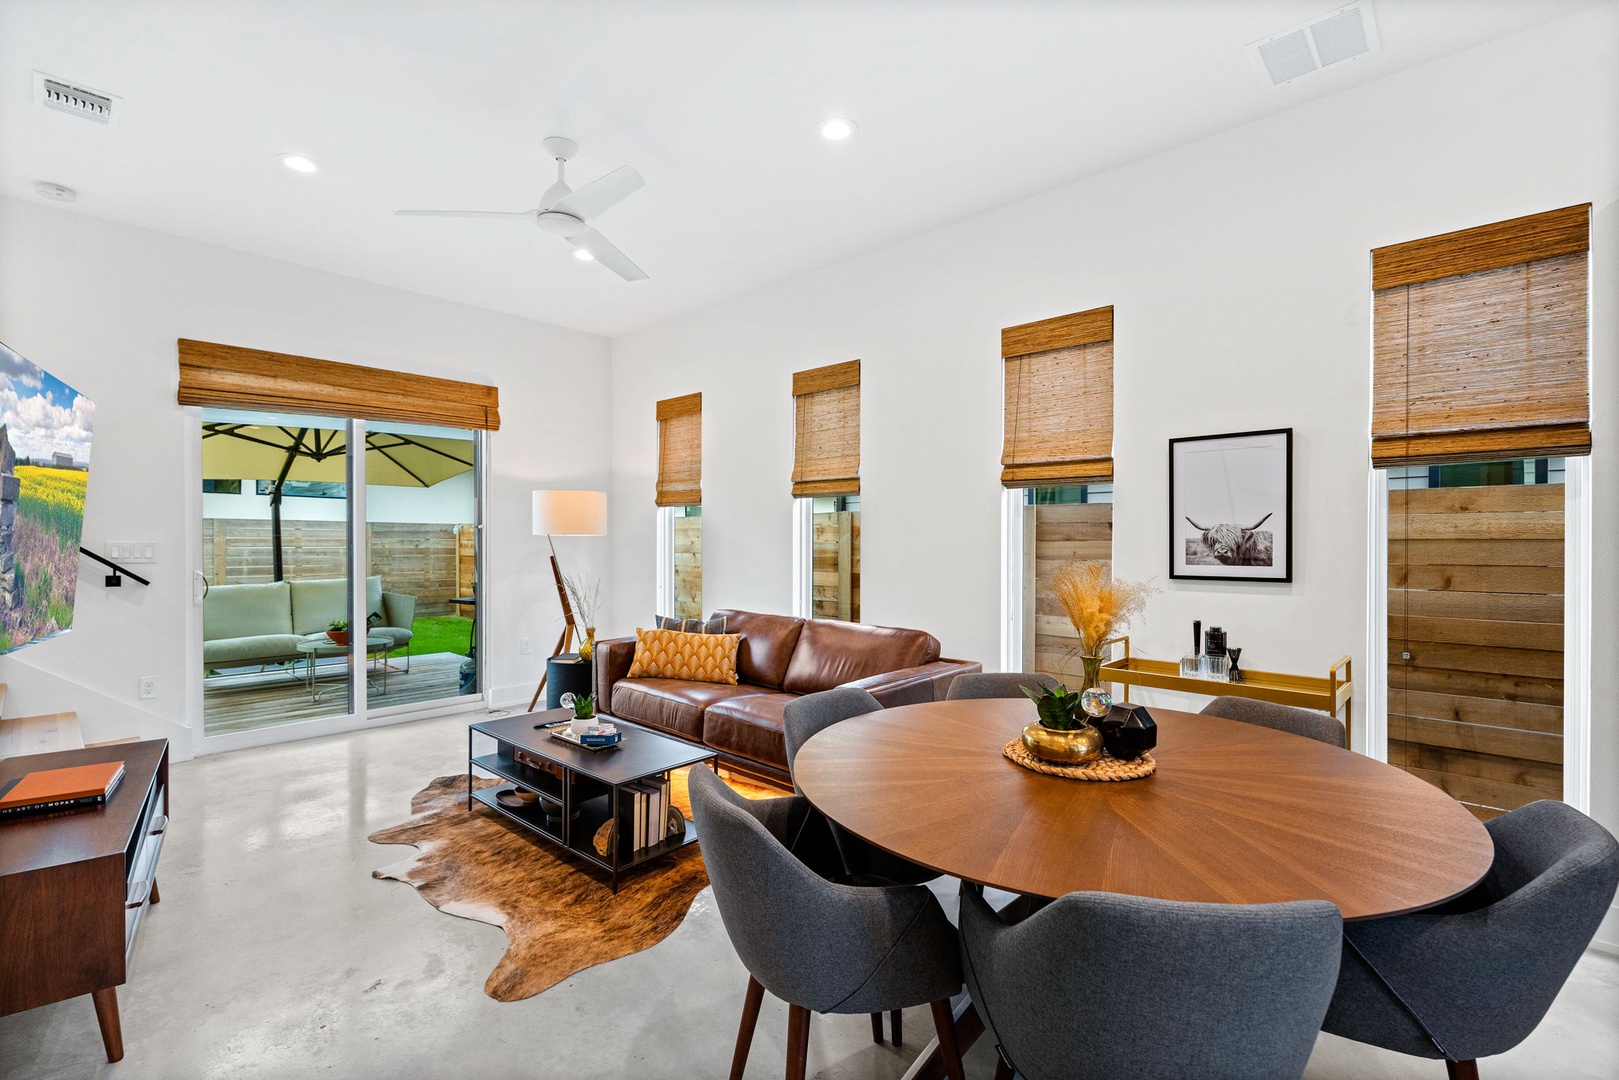 Enjoy the open, light-filled spaces of the main level great room